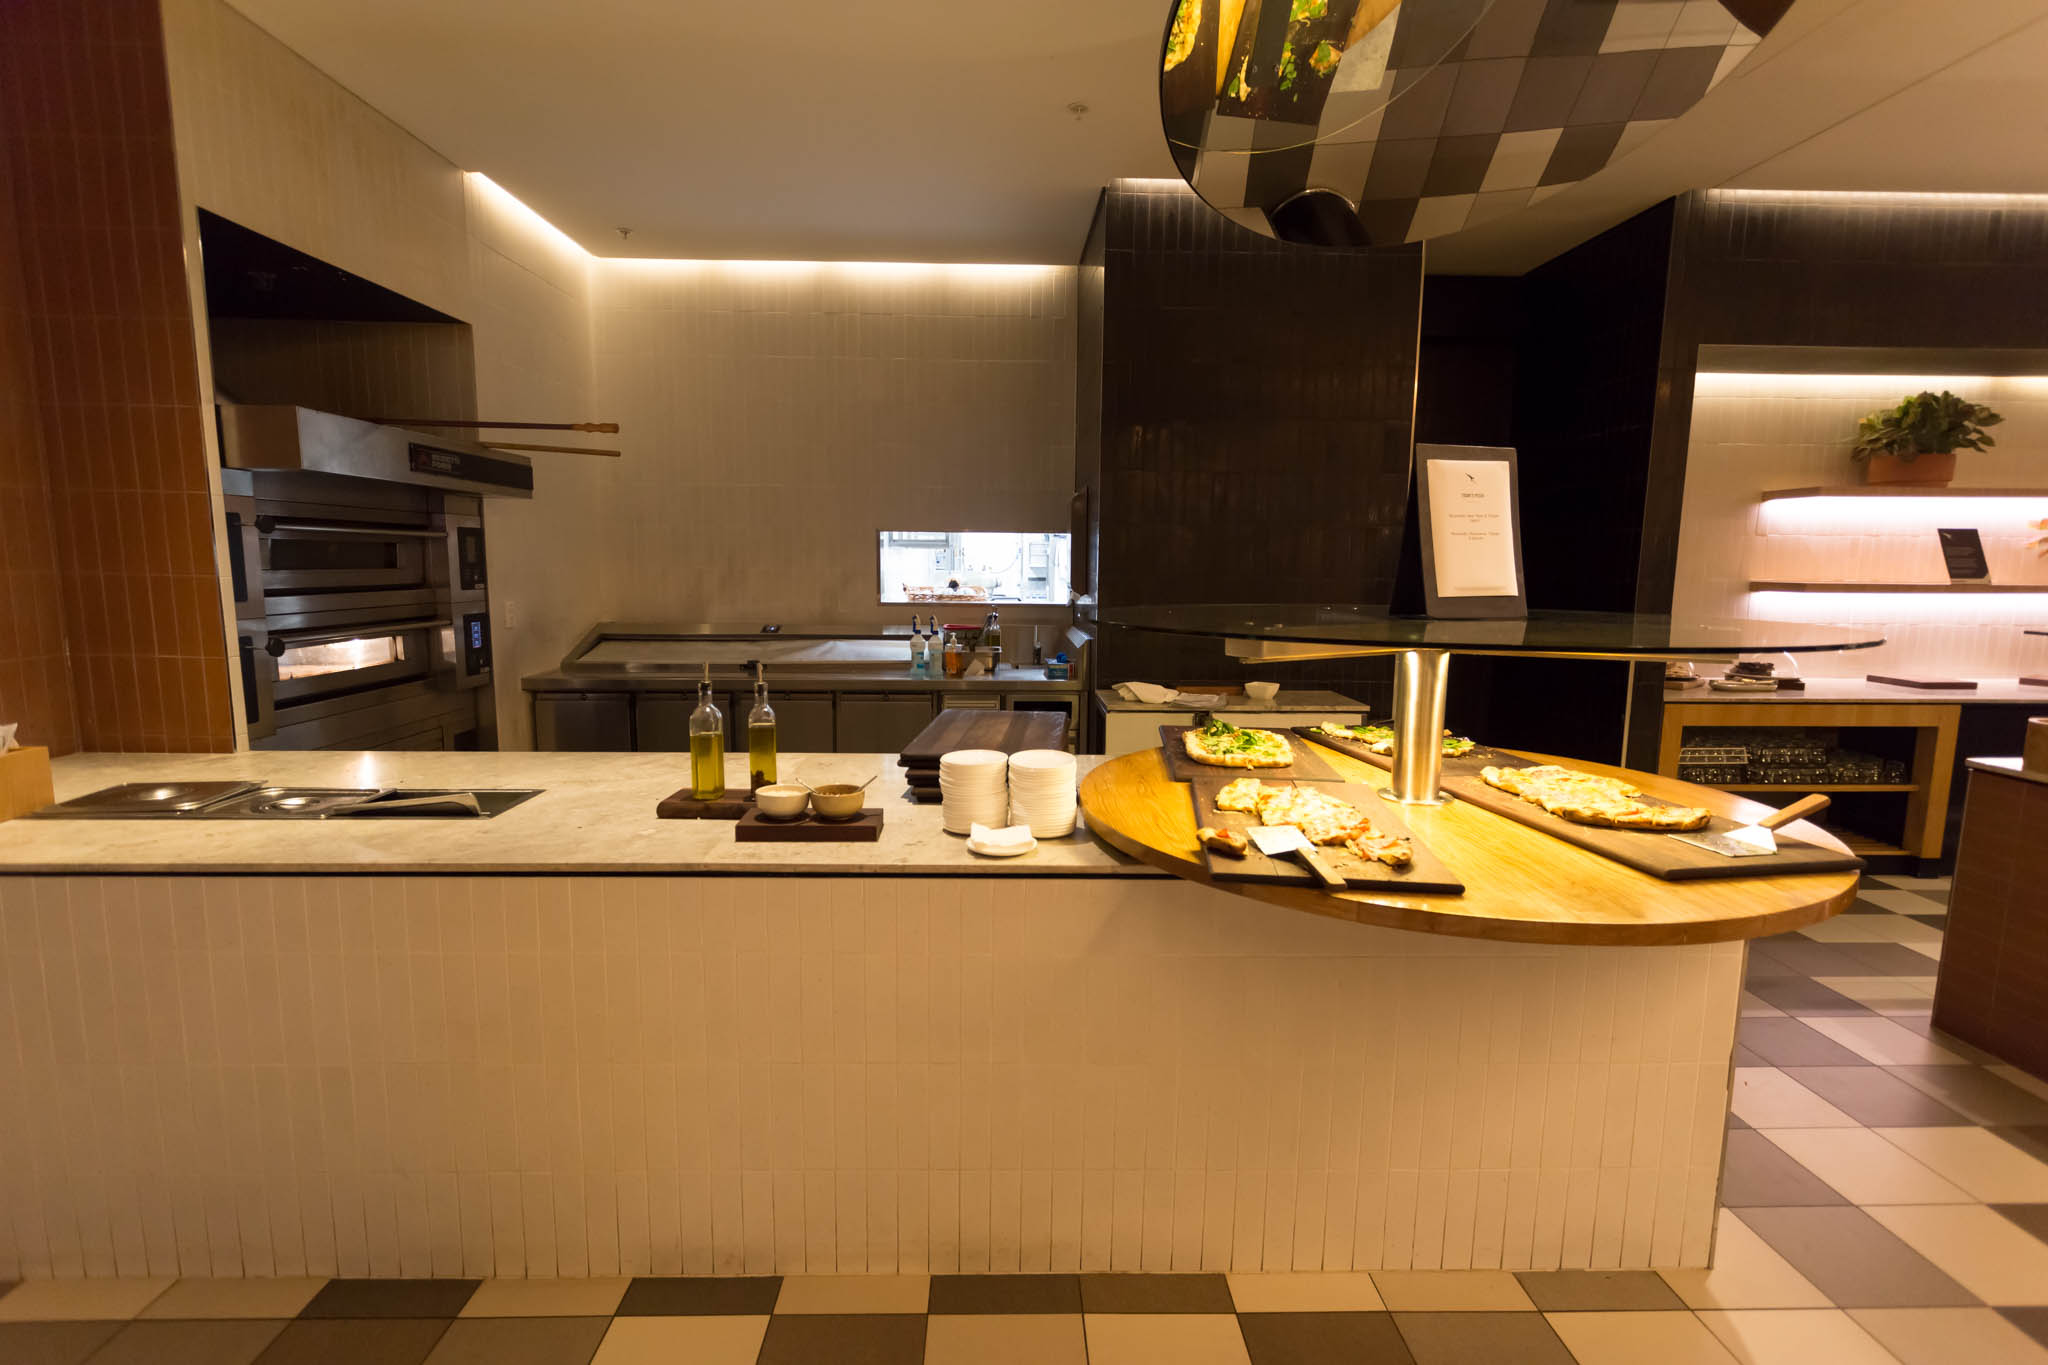 a kitchen with pizzas on a counter